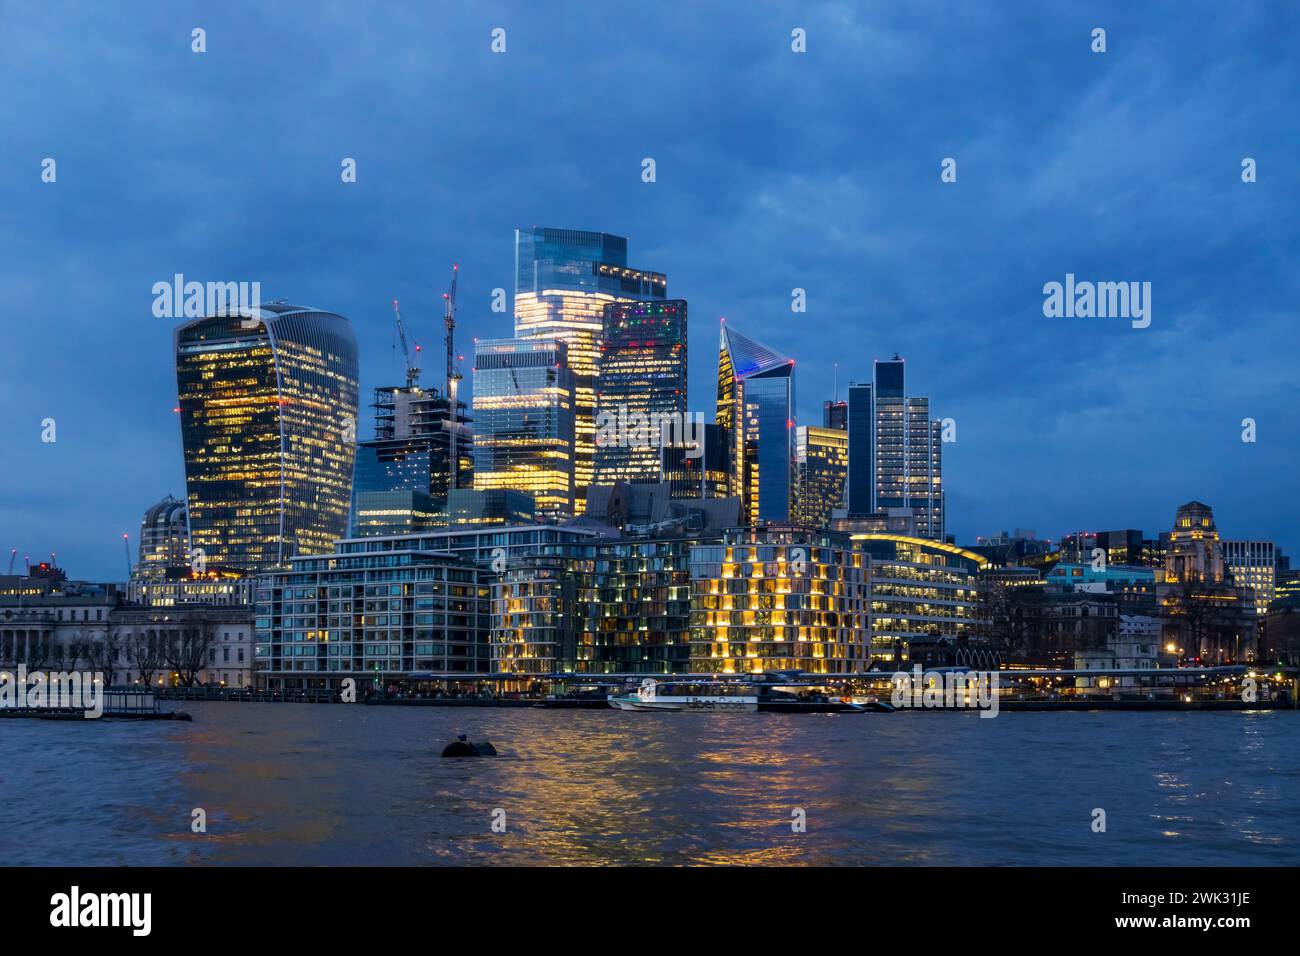 The dense commercial development of the City of London skyline seen across the River Thames at dusk. Stock Photo